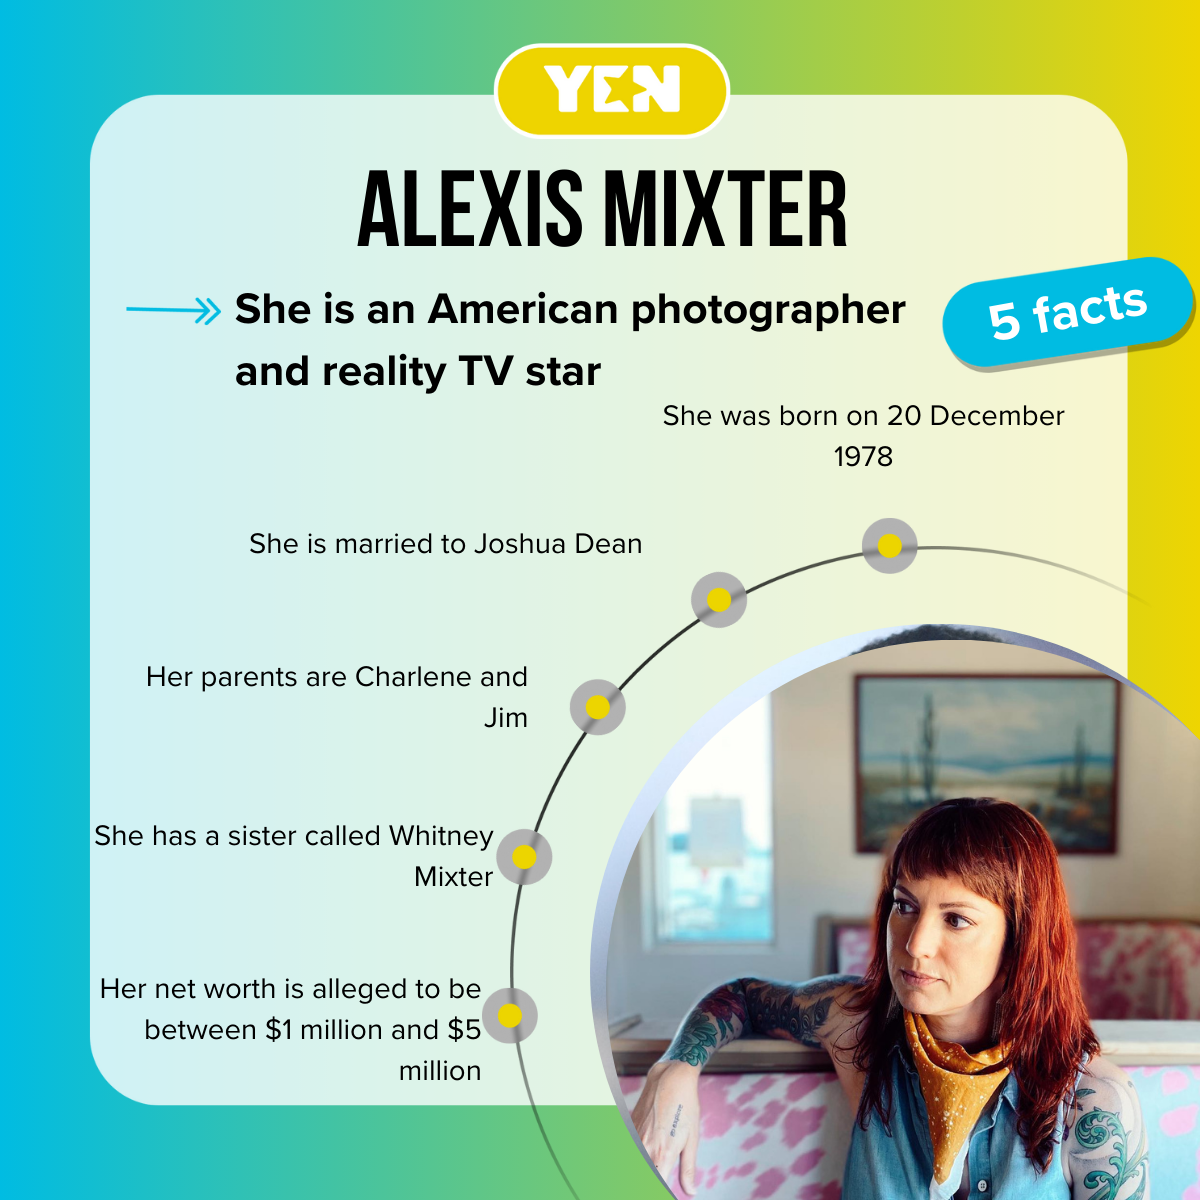 Five facts about Alexis Mixter